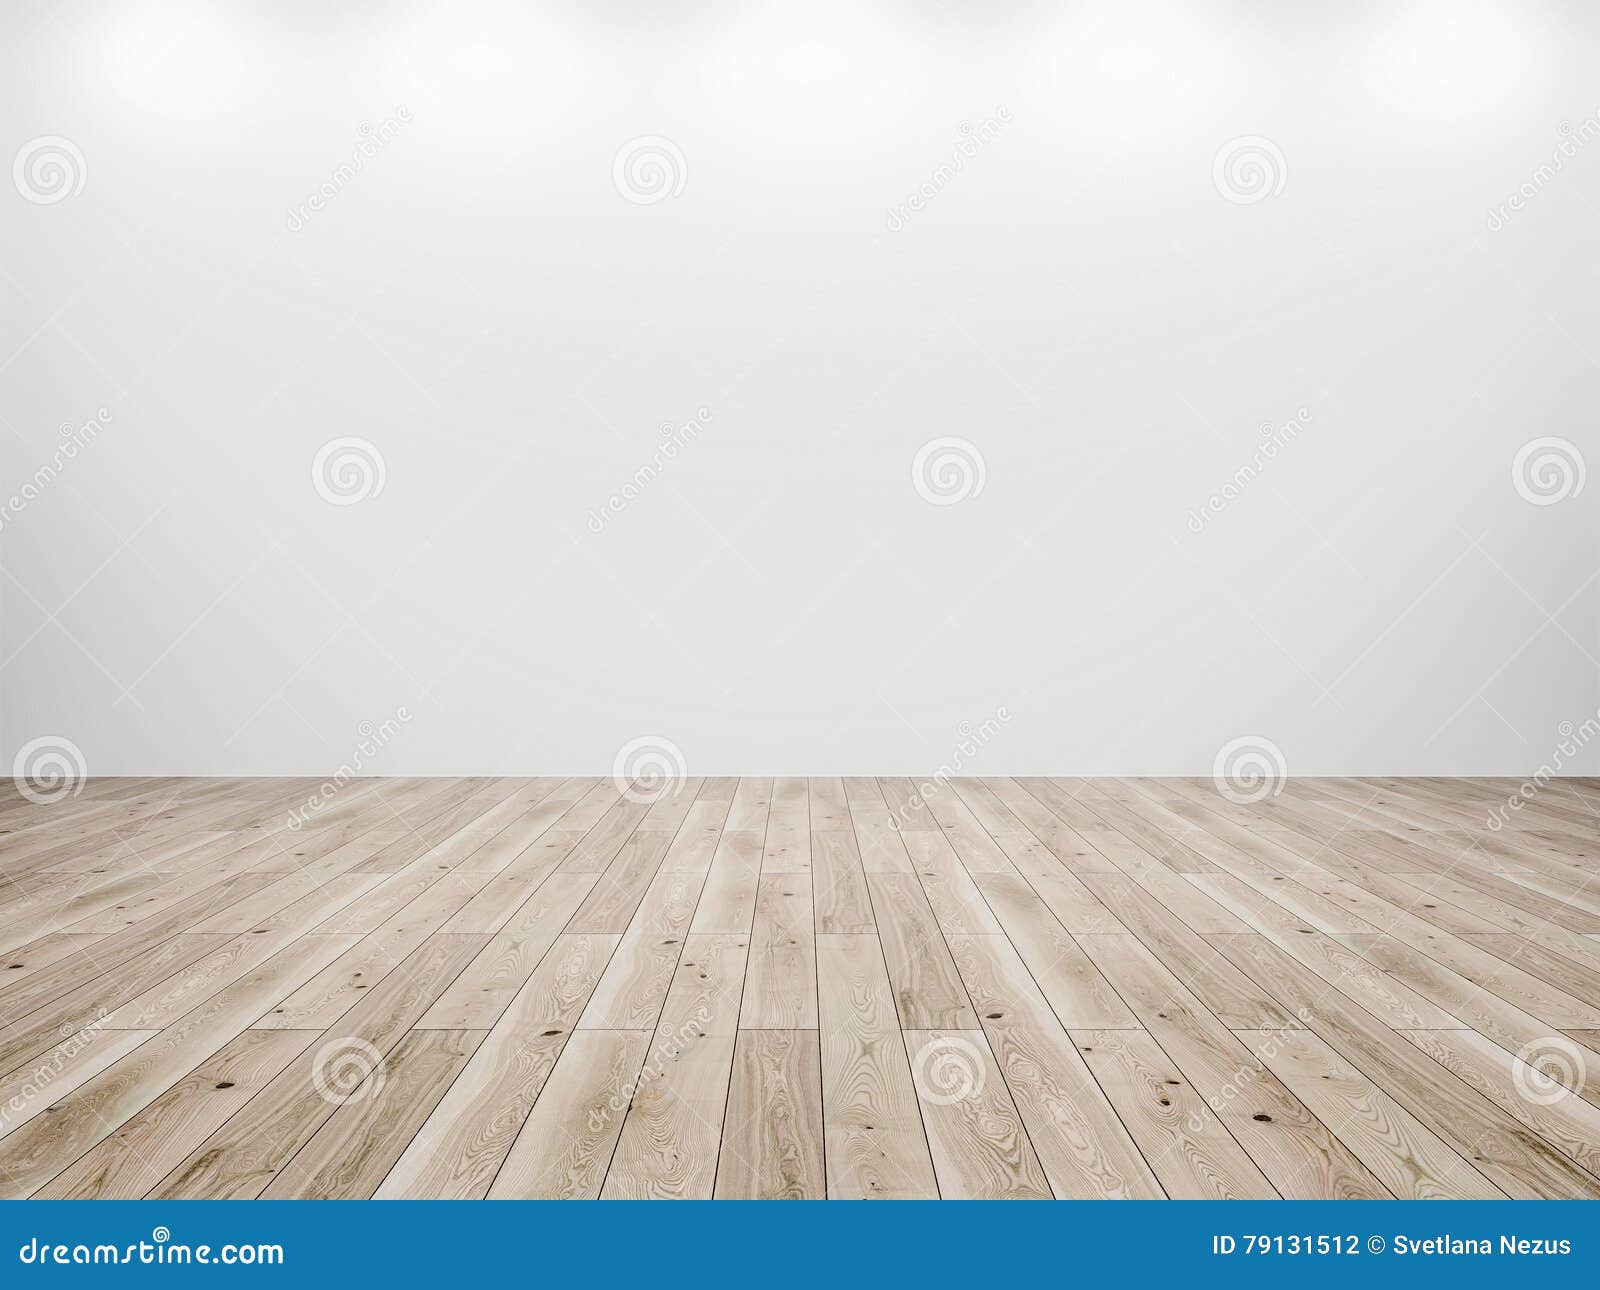 white wall and wood floor background